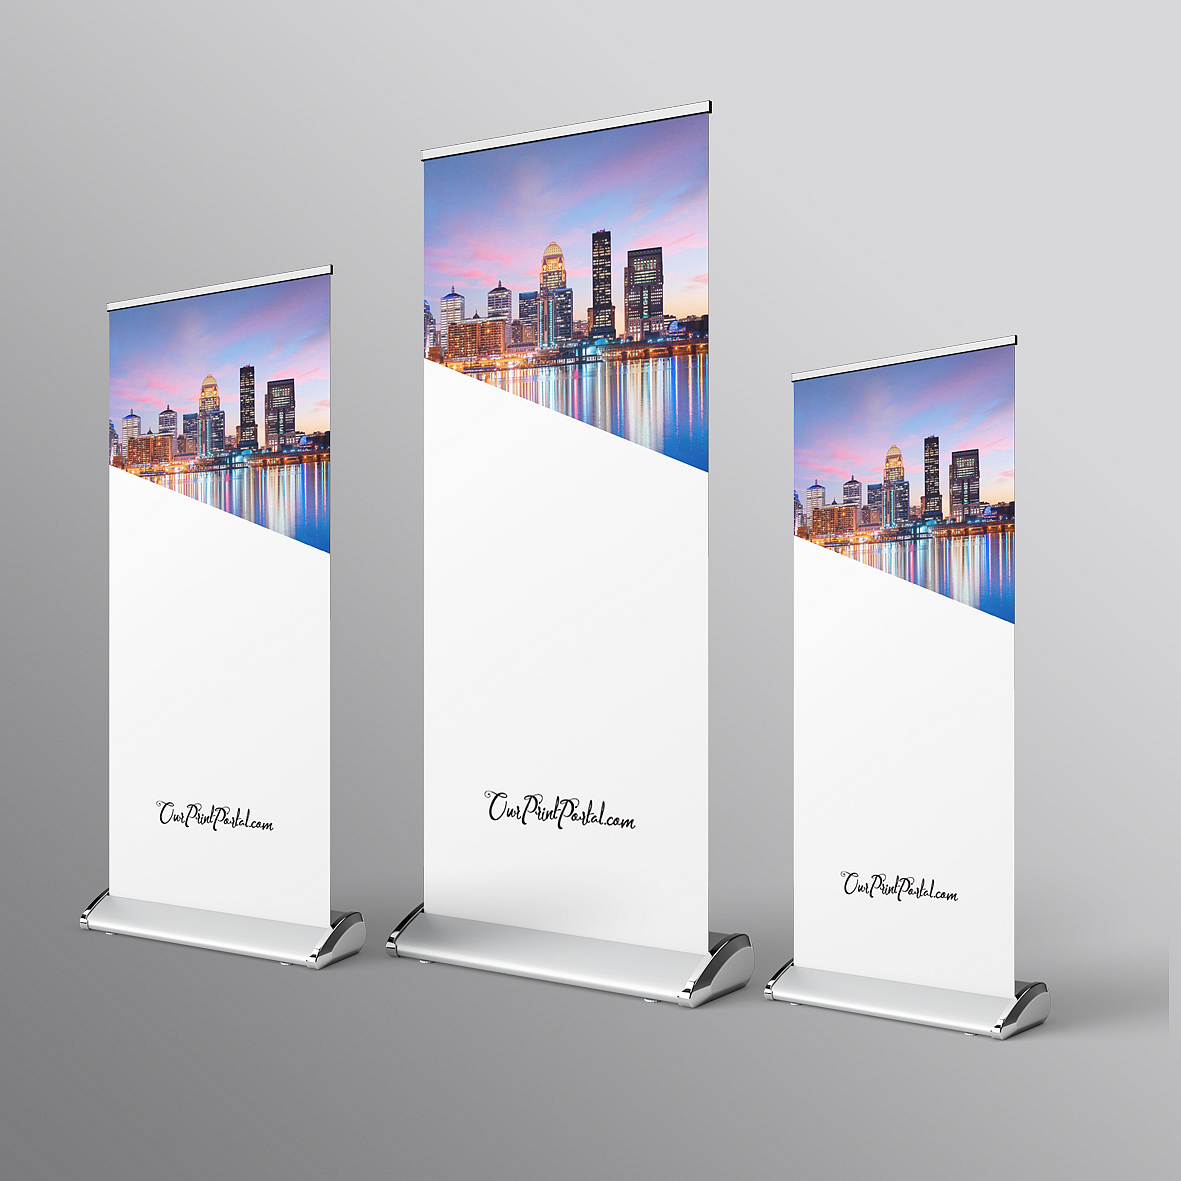 1000mm Wide Roller Banners